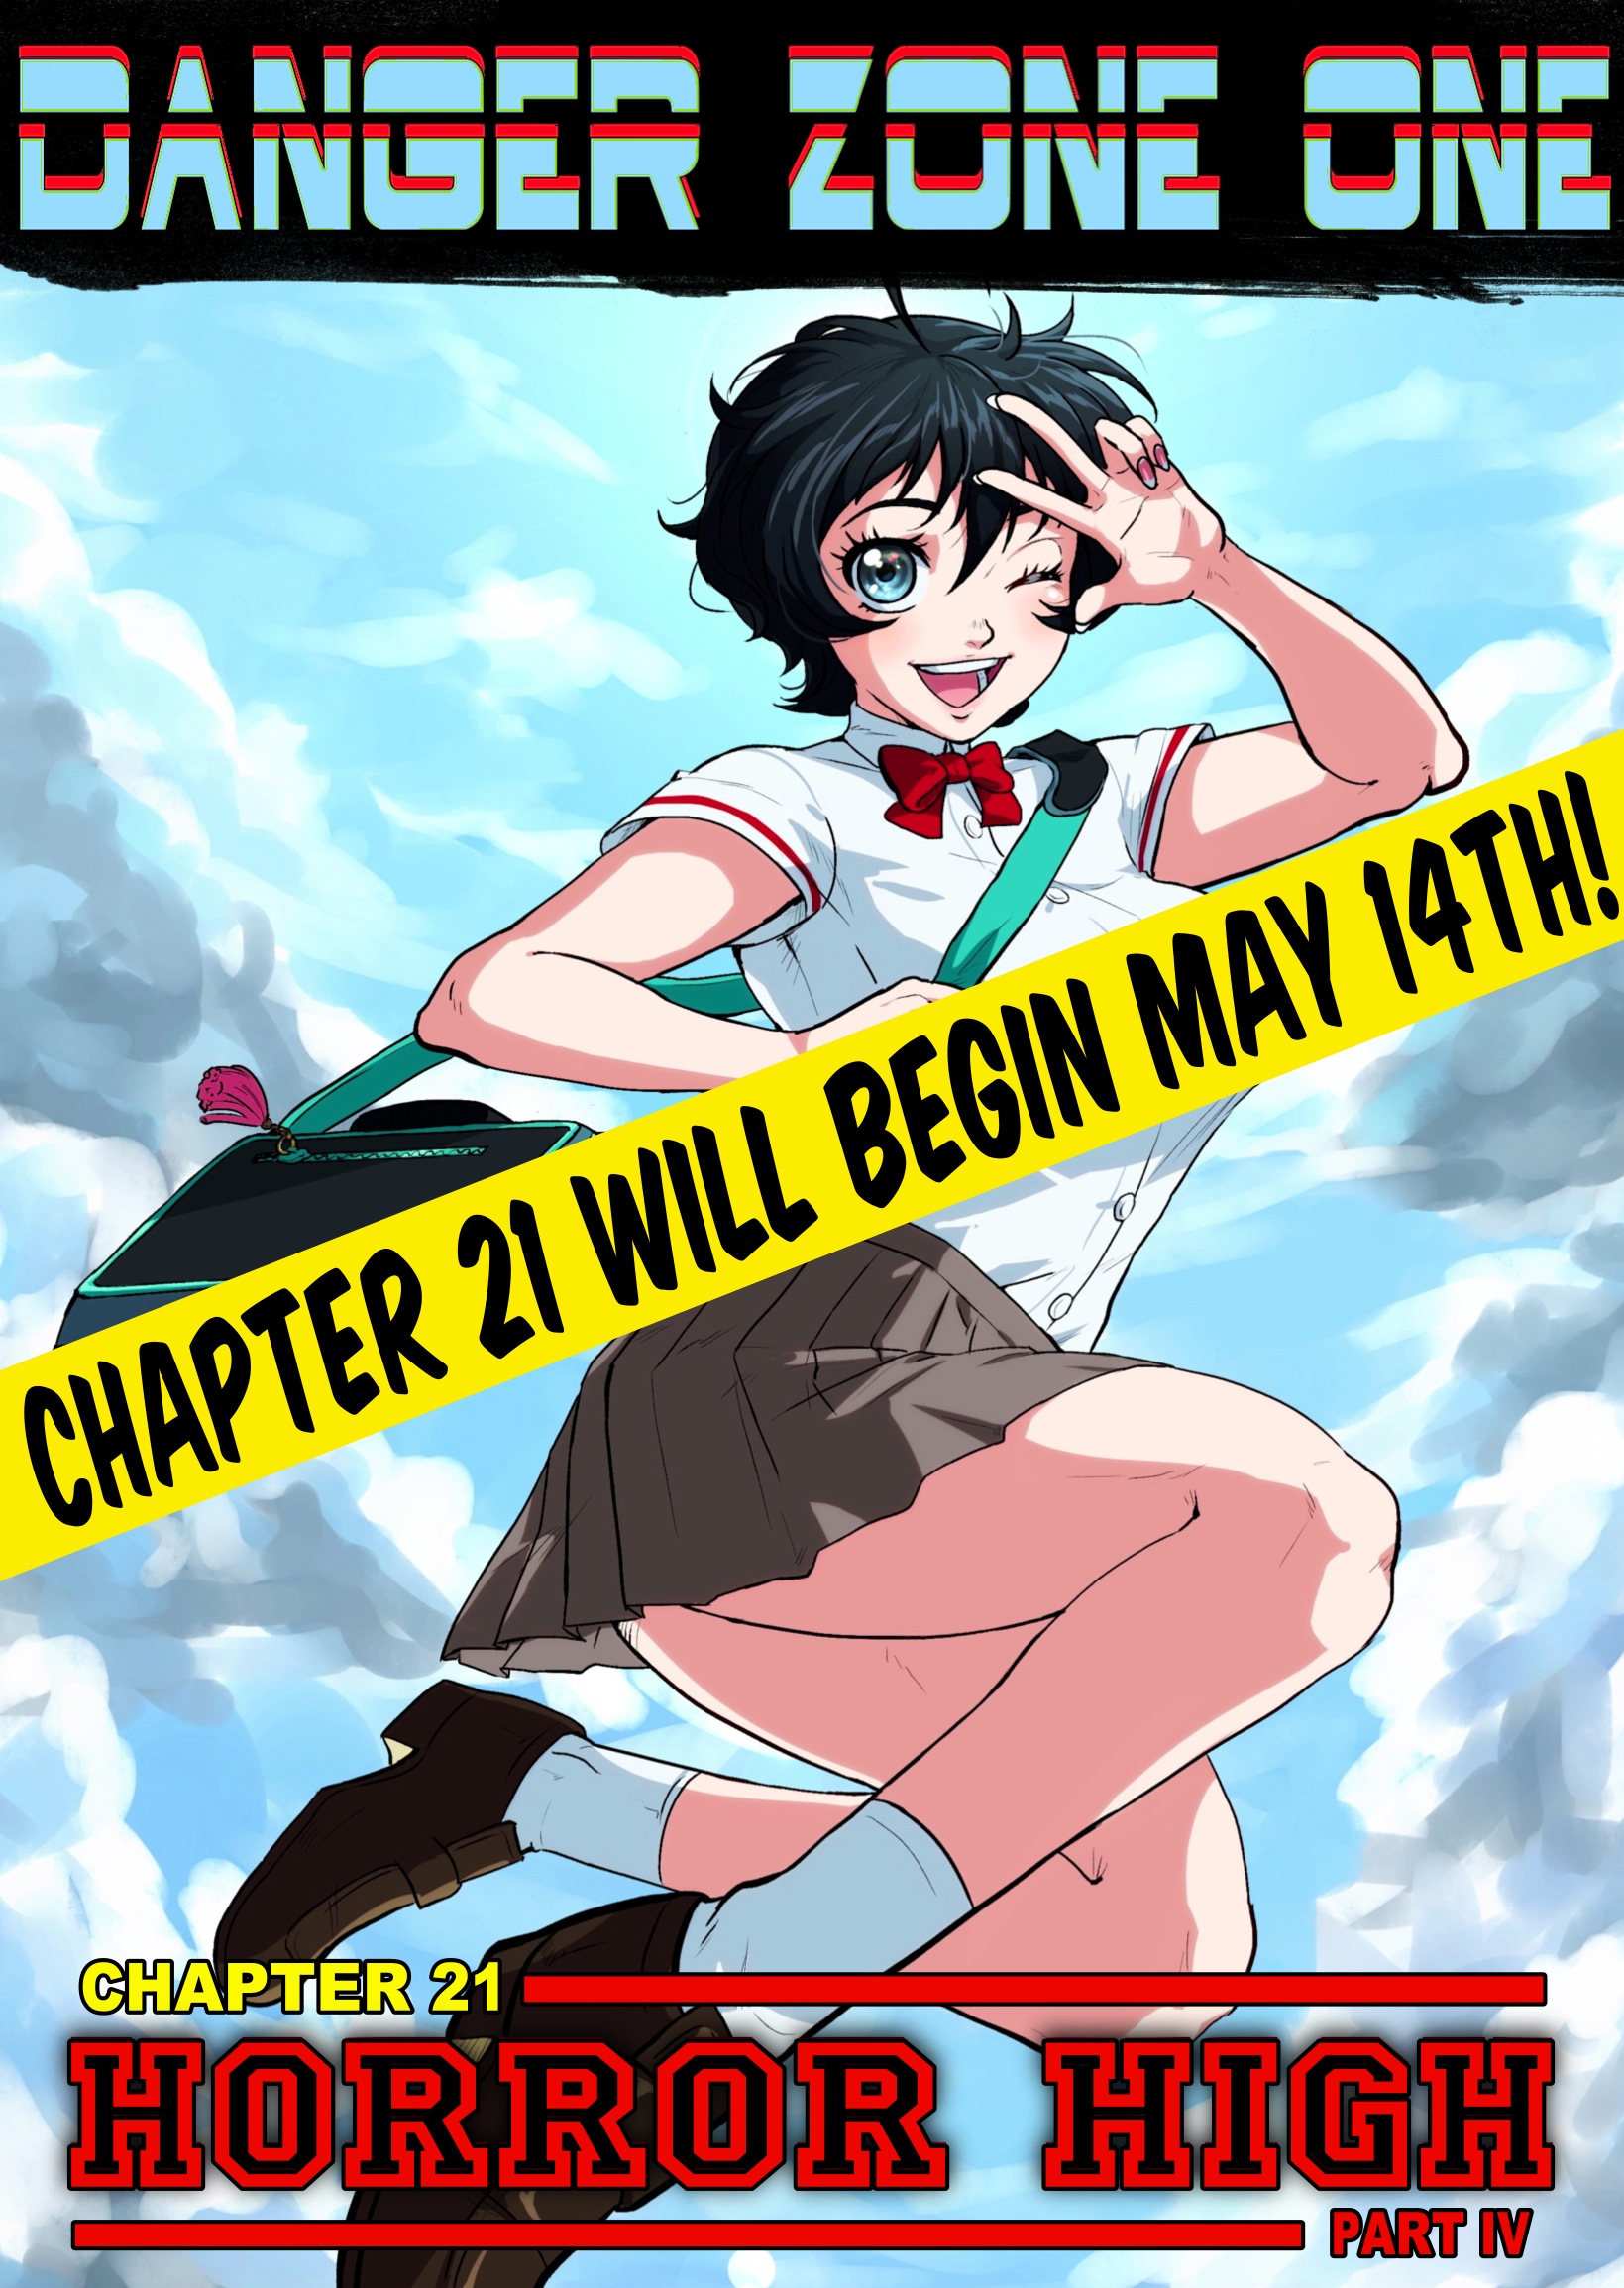 Chapter 21 Update!